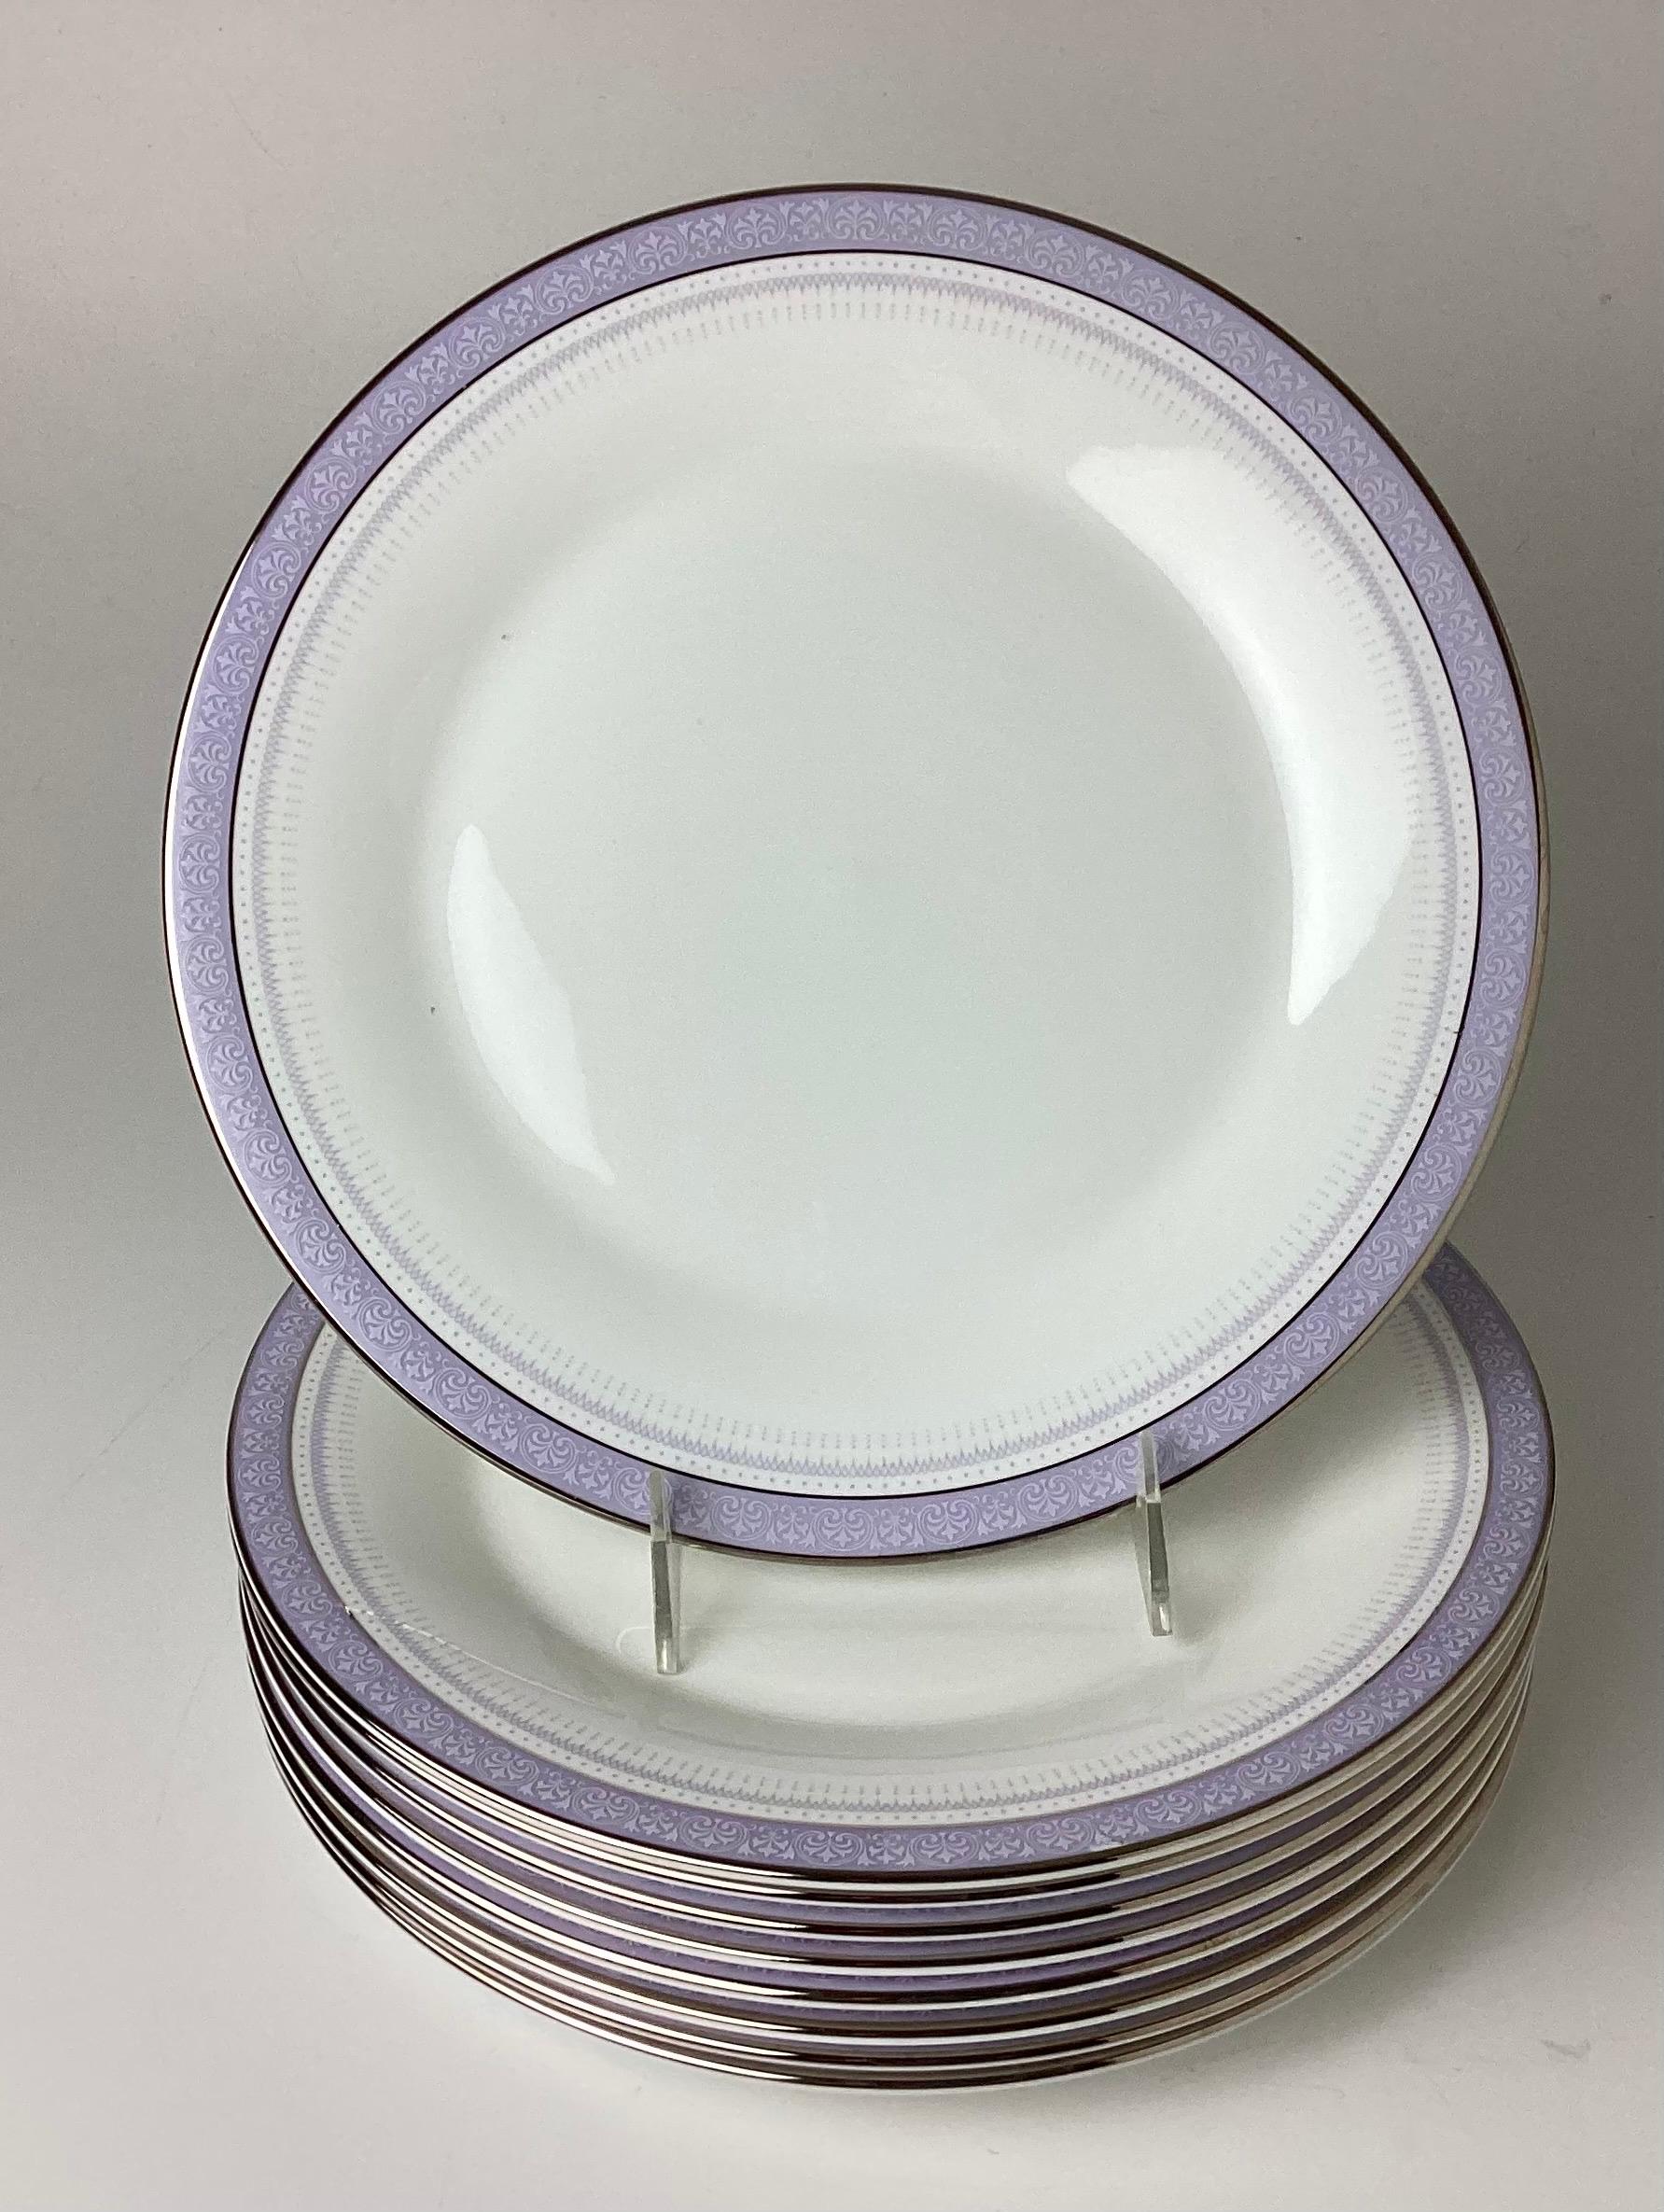 Set of 8 plus One Lilactime by ROYAL DOULTON Dinner Service Plates. White Scrolls On Lilac Band. 10 3/4” in diameter. This is a discontinued pattern. Great condition